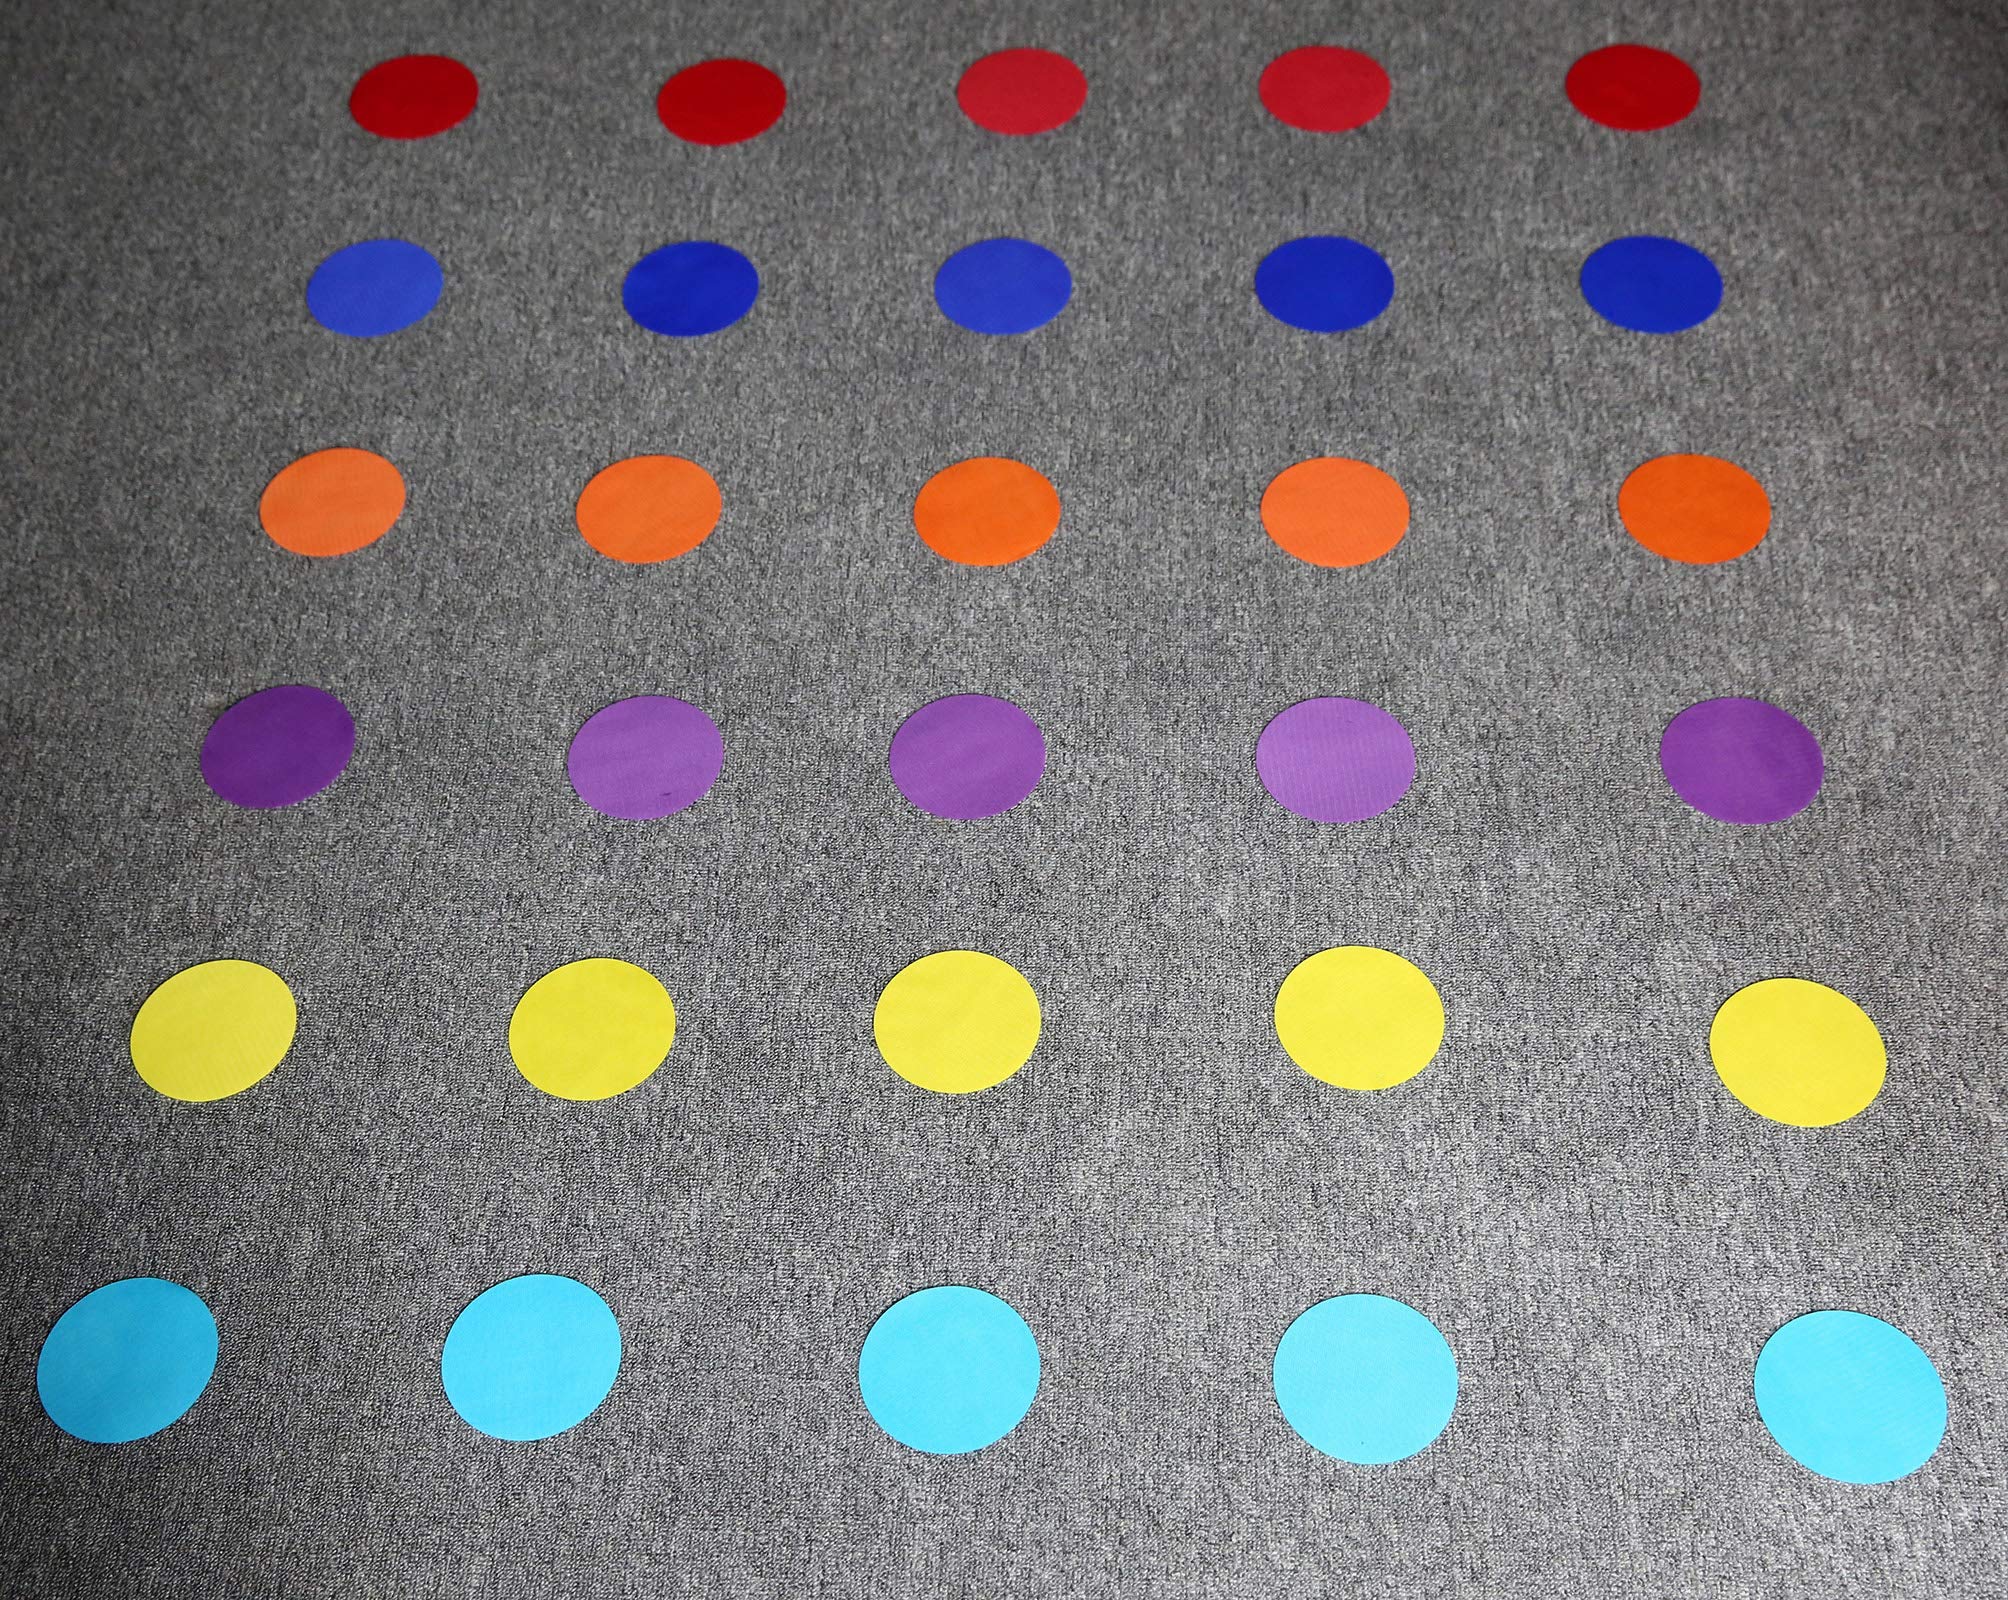  Anitor Carpet Markers 5 for Kids, Multicolor Spot